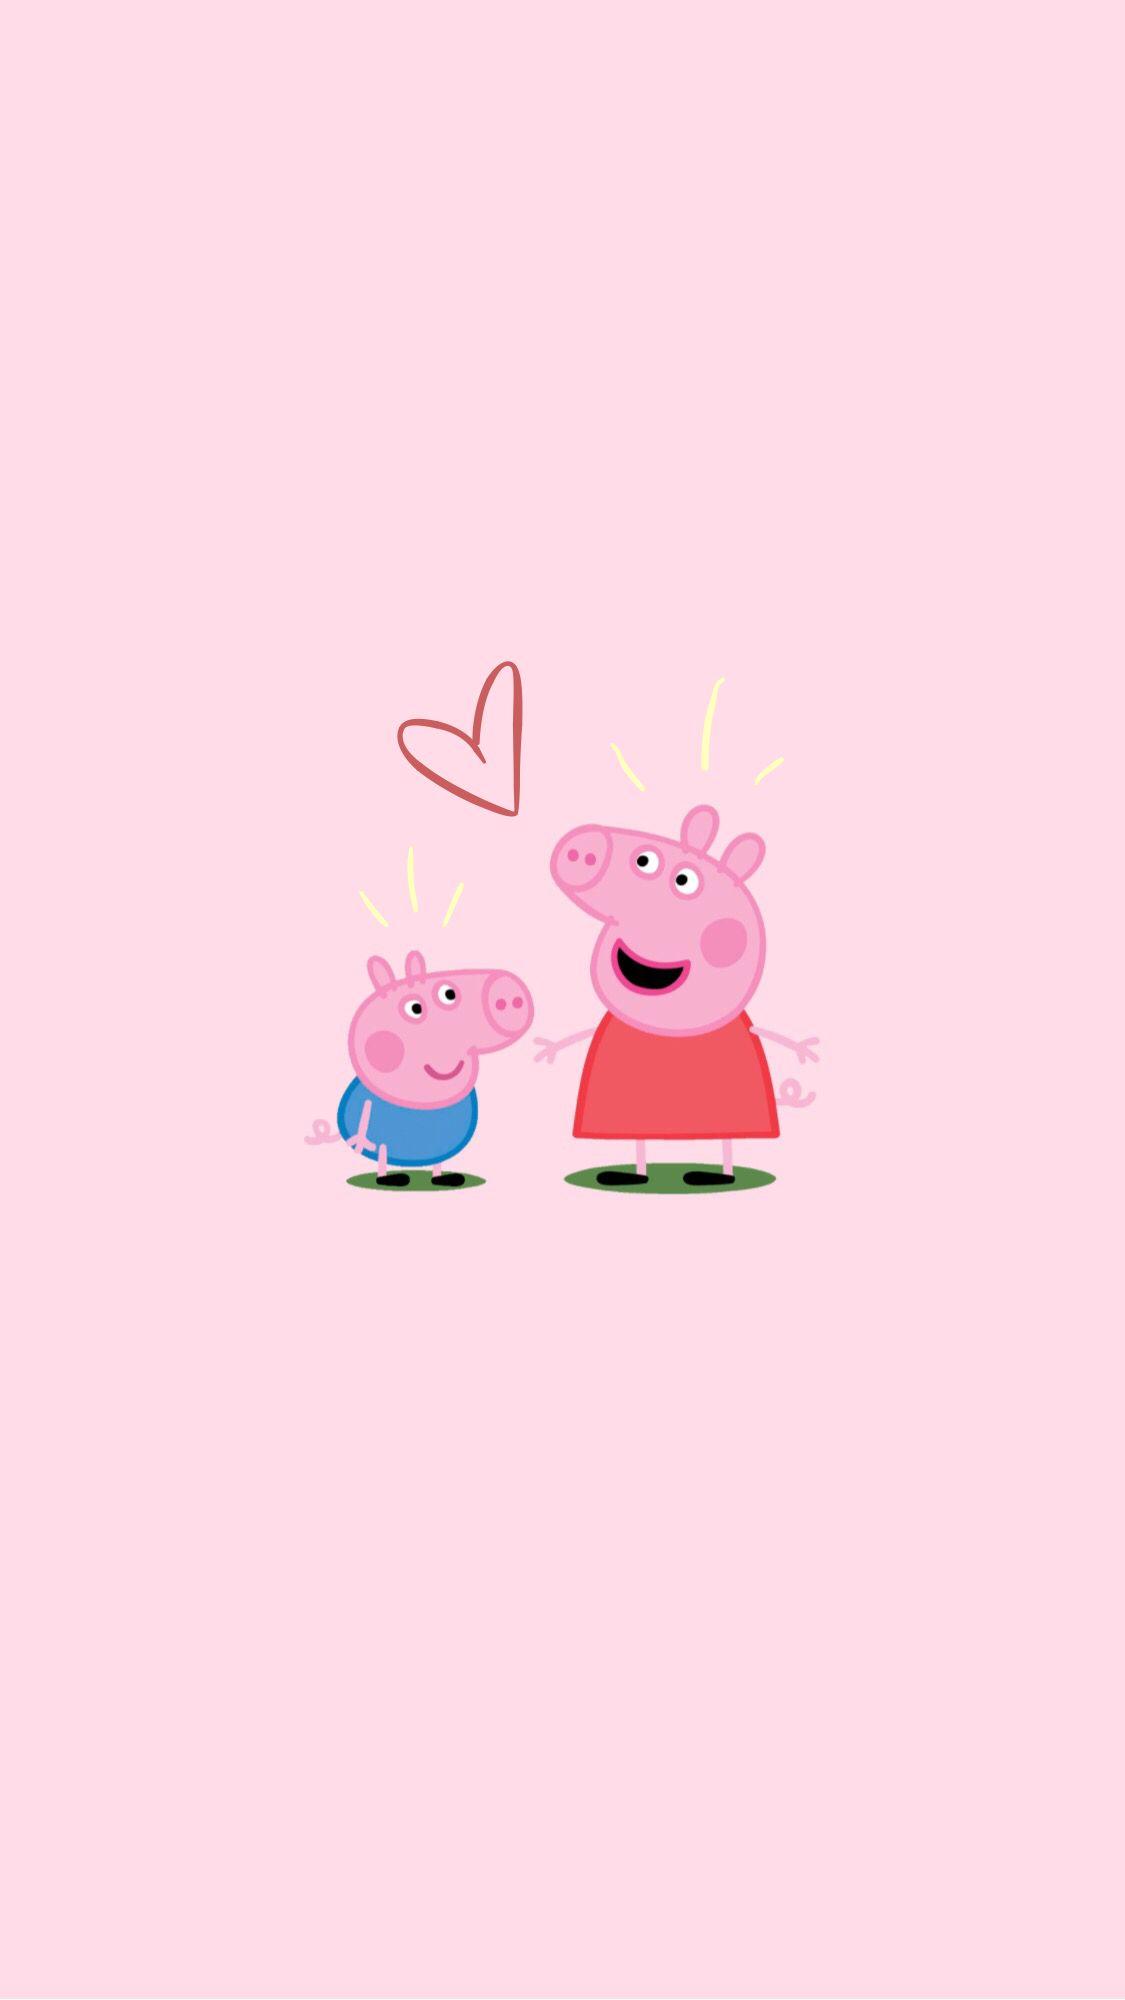 Peppa Pig Aesthetics Wallpapers Wallpaper Cave If you're looking for the best peppa pig wallpapers then wallpapertag is the place to be. peppa pig aesthetics wallpapers